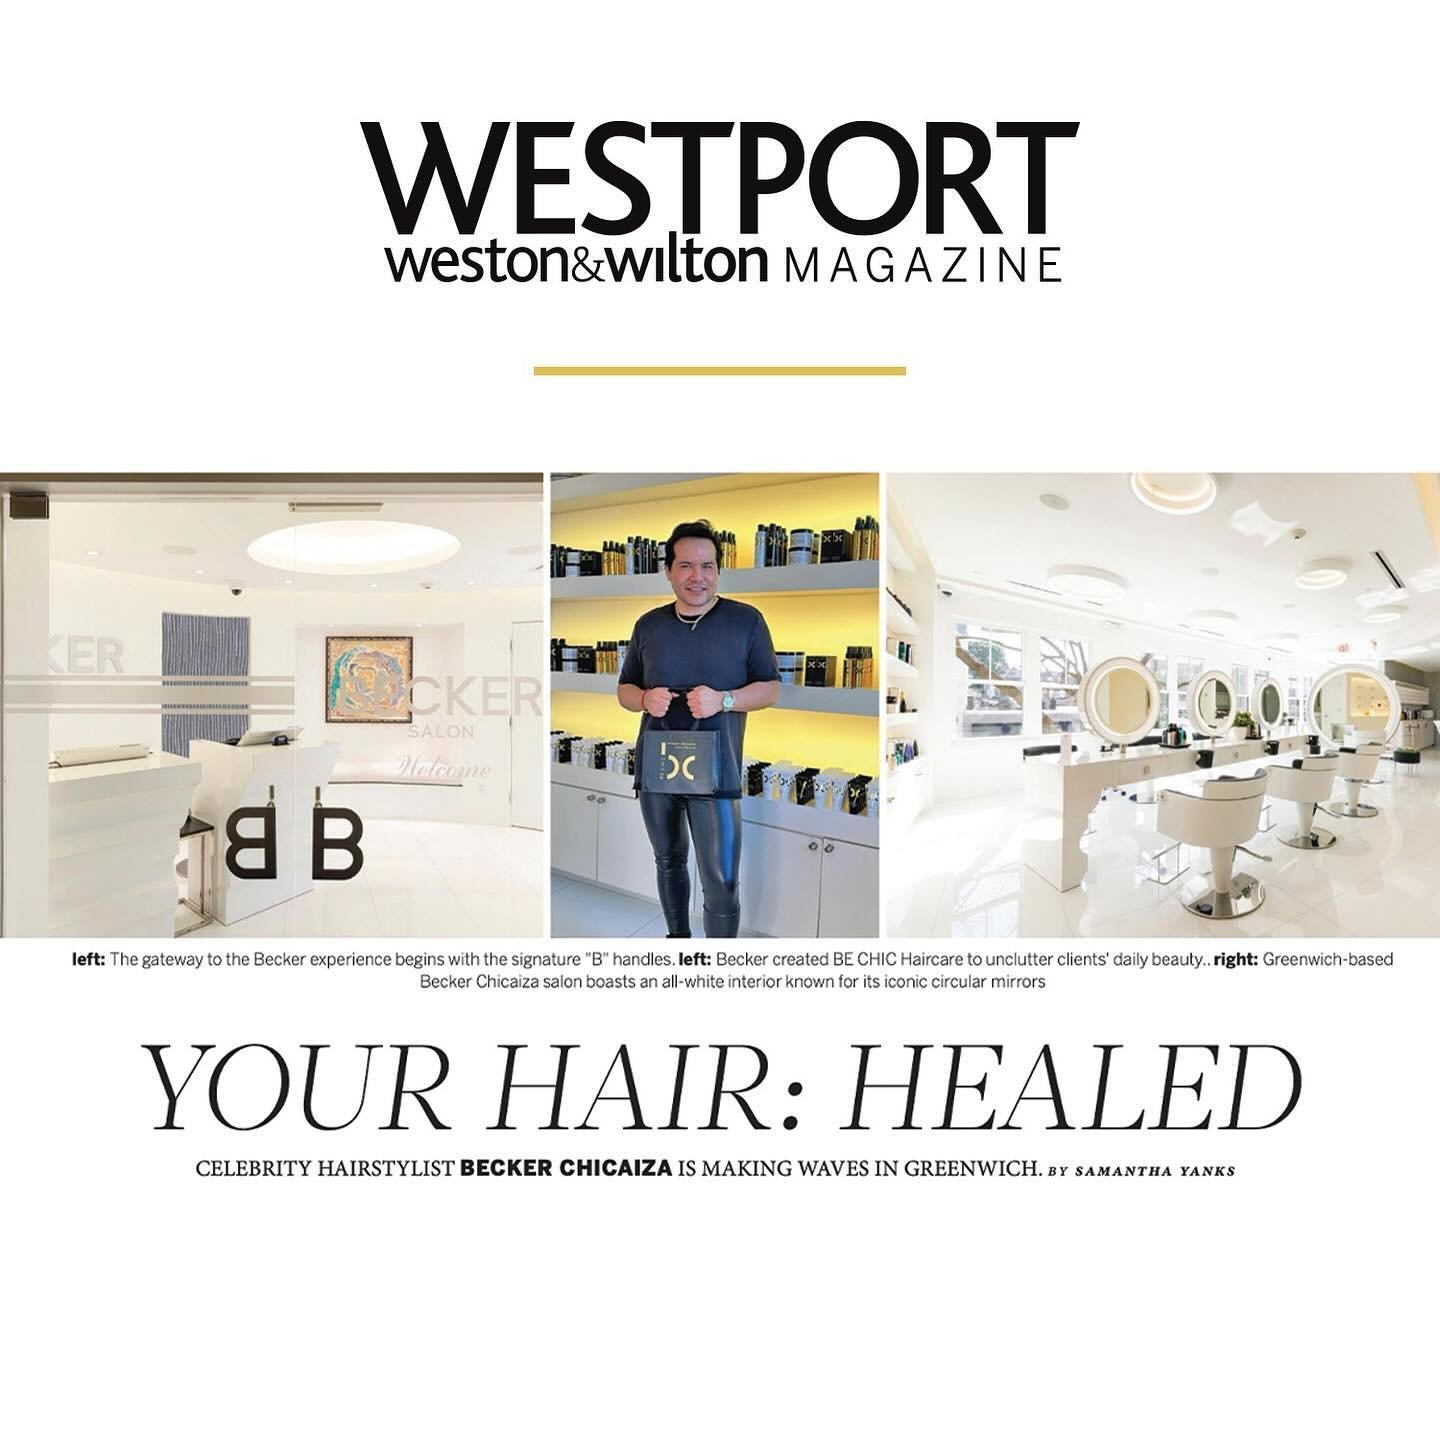 Editors are loving Becker + BE CHIC Haircare. &ldquo;YOUR HAIR: HEALED&rdquo;. -✍️Editor-in-Chief @samanthayanks @westportmagazine thank you!